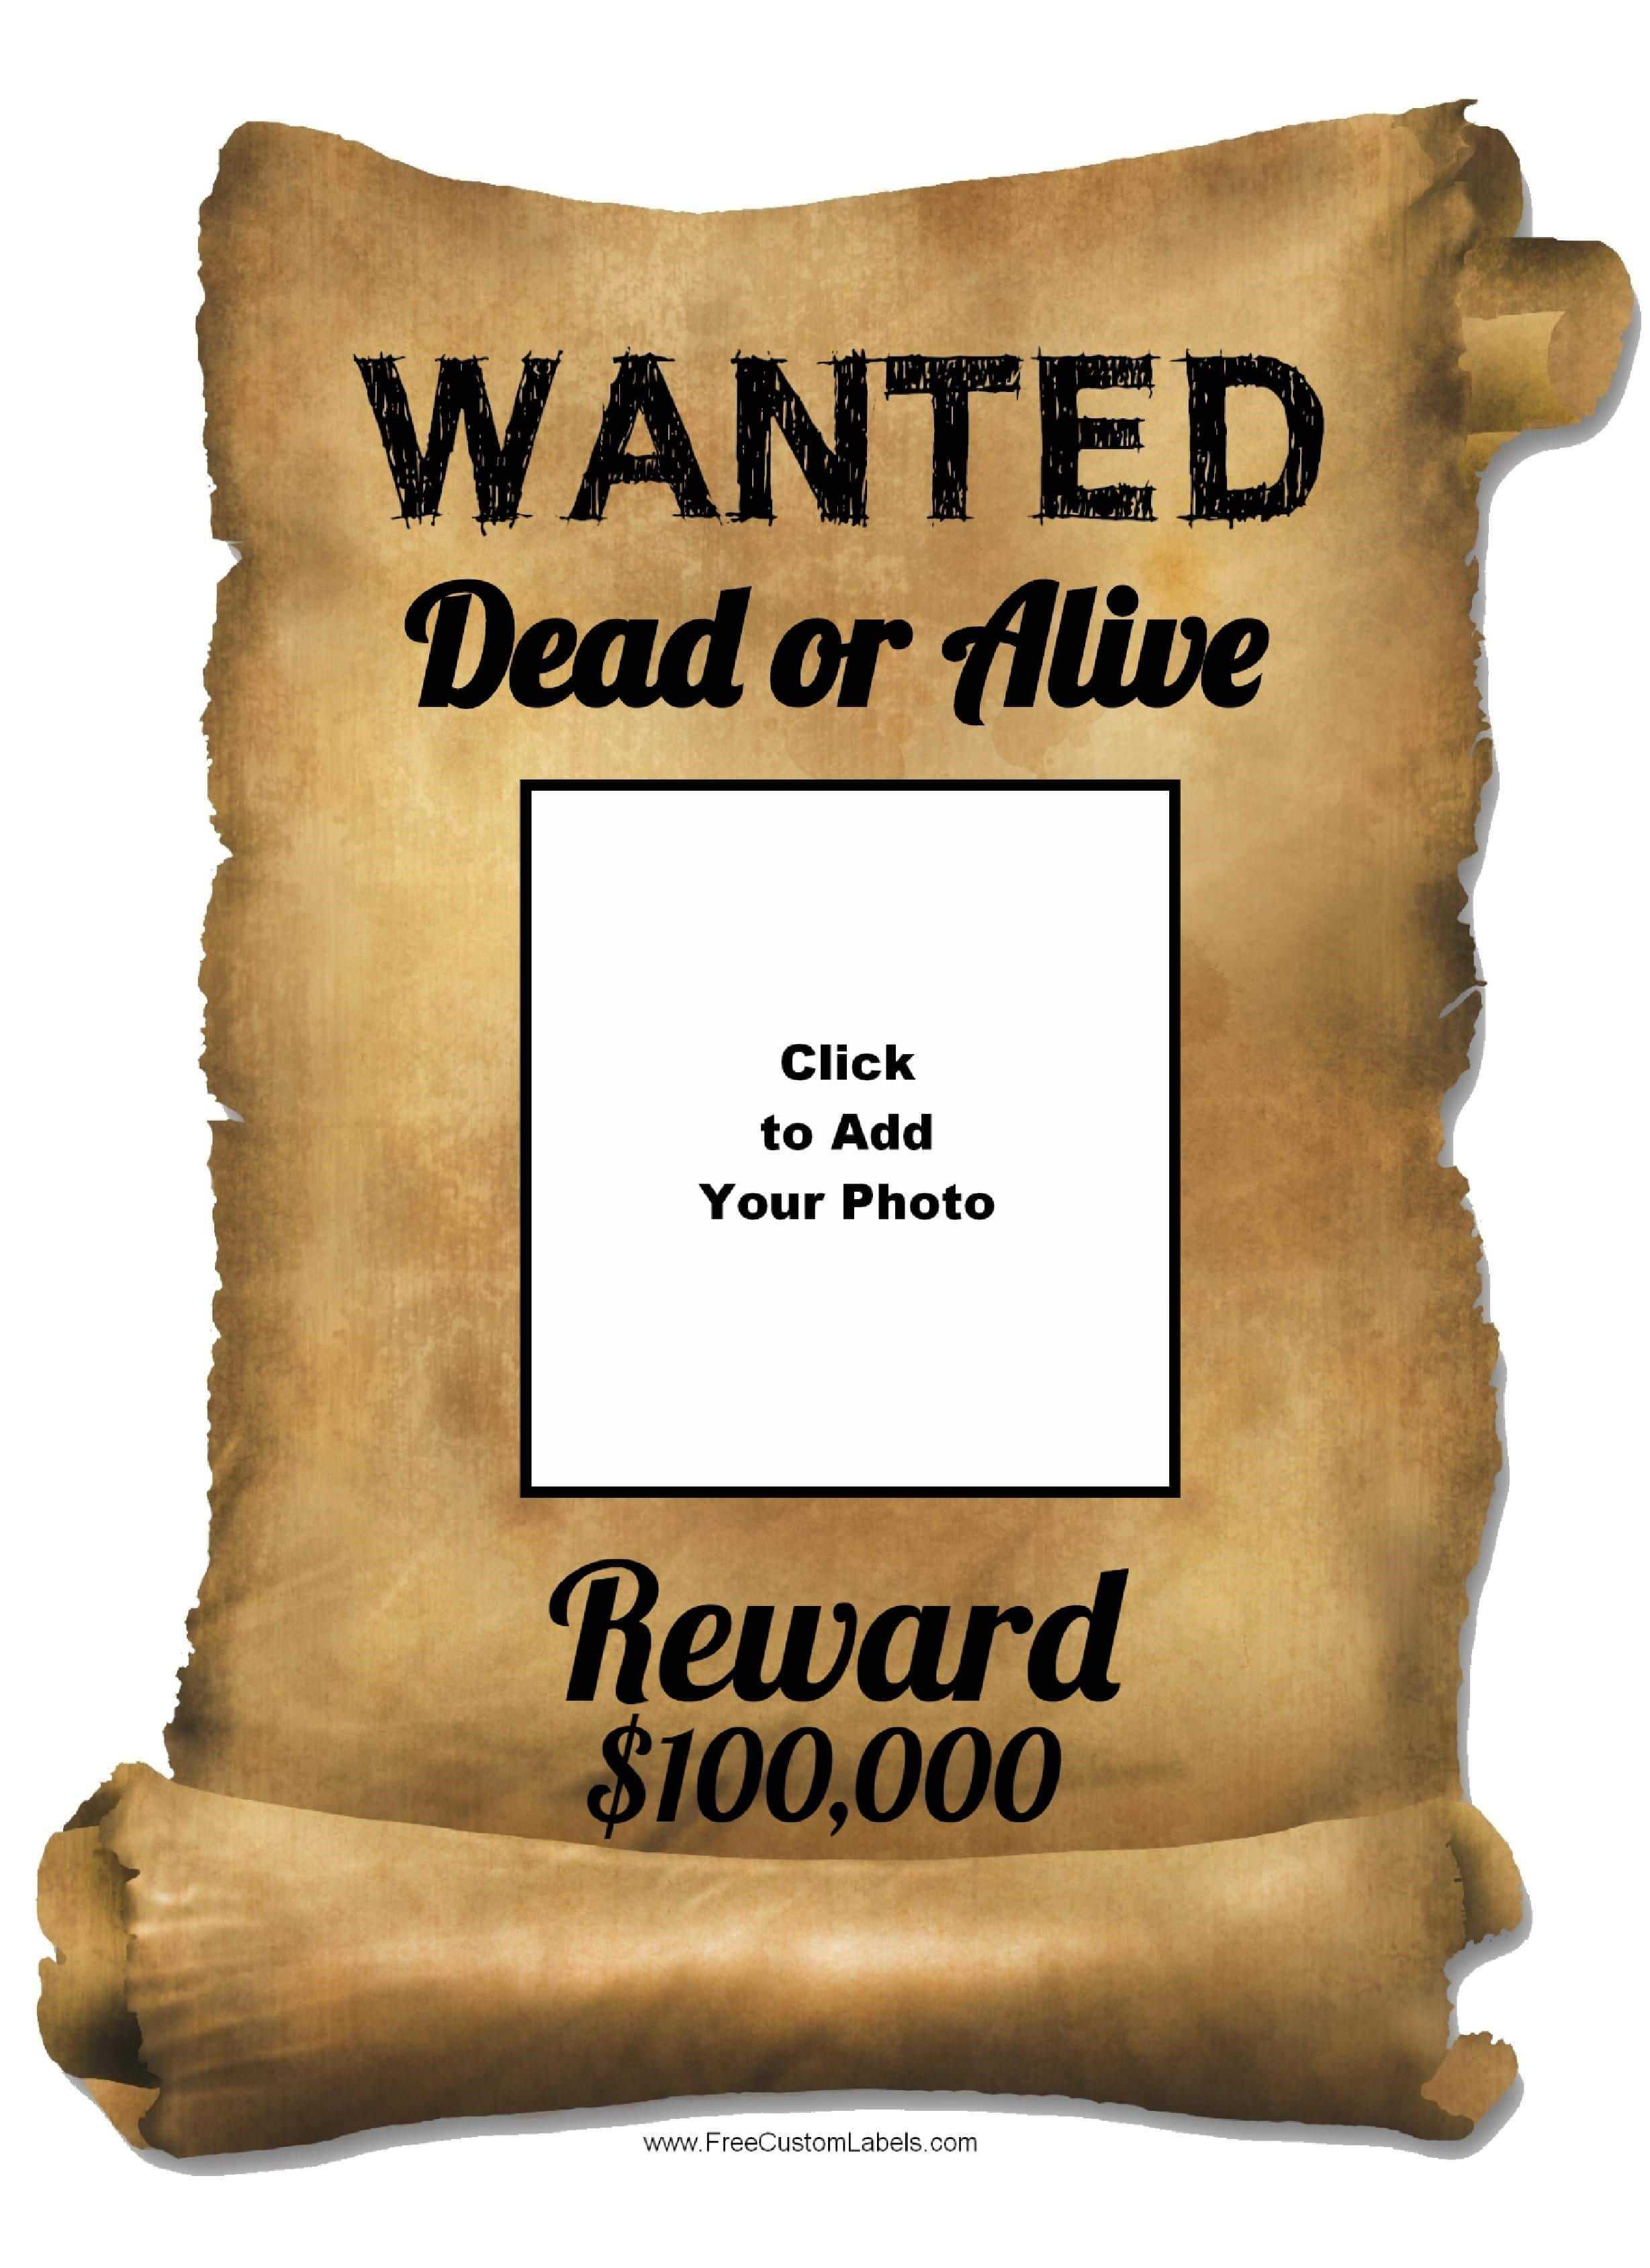 a-template-wanted-poster-free-for-use-bulletin-boards-free